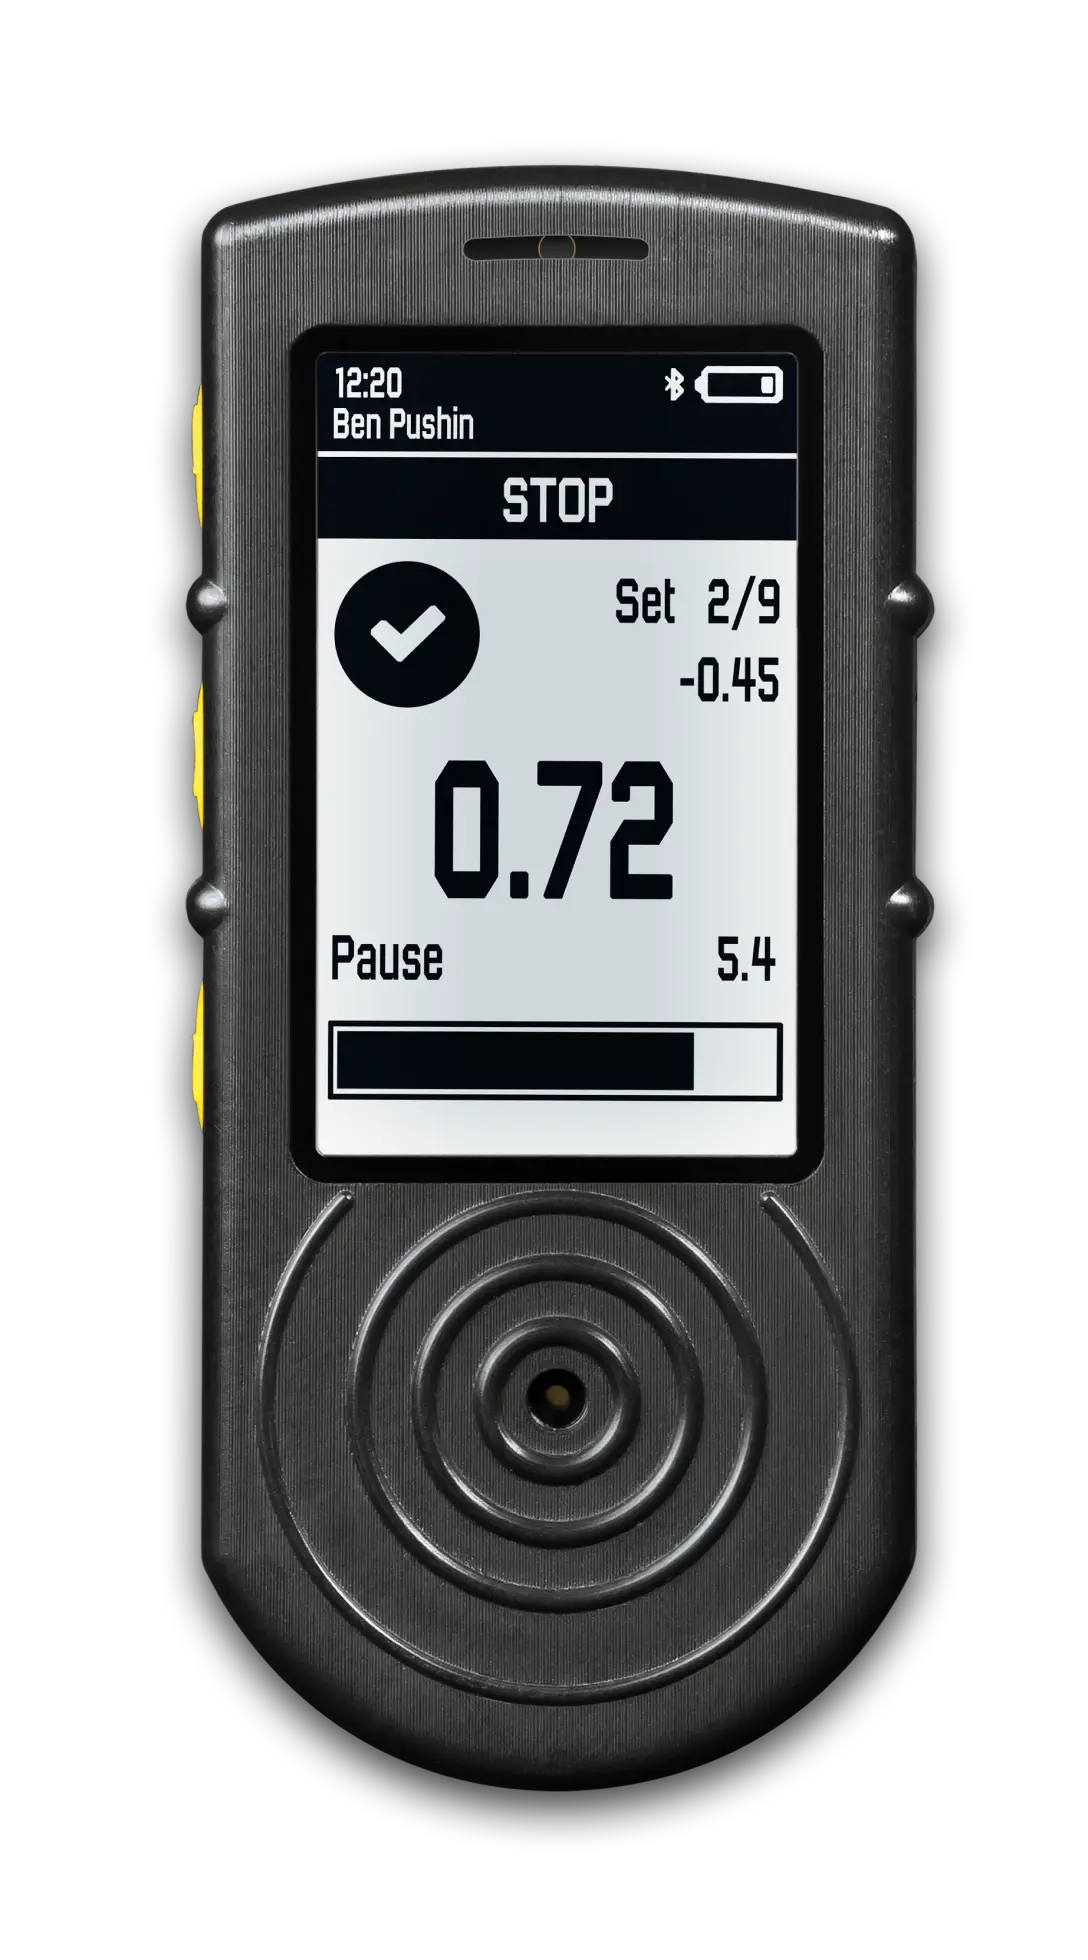 Our Drills mobile app for Shot Timers